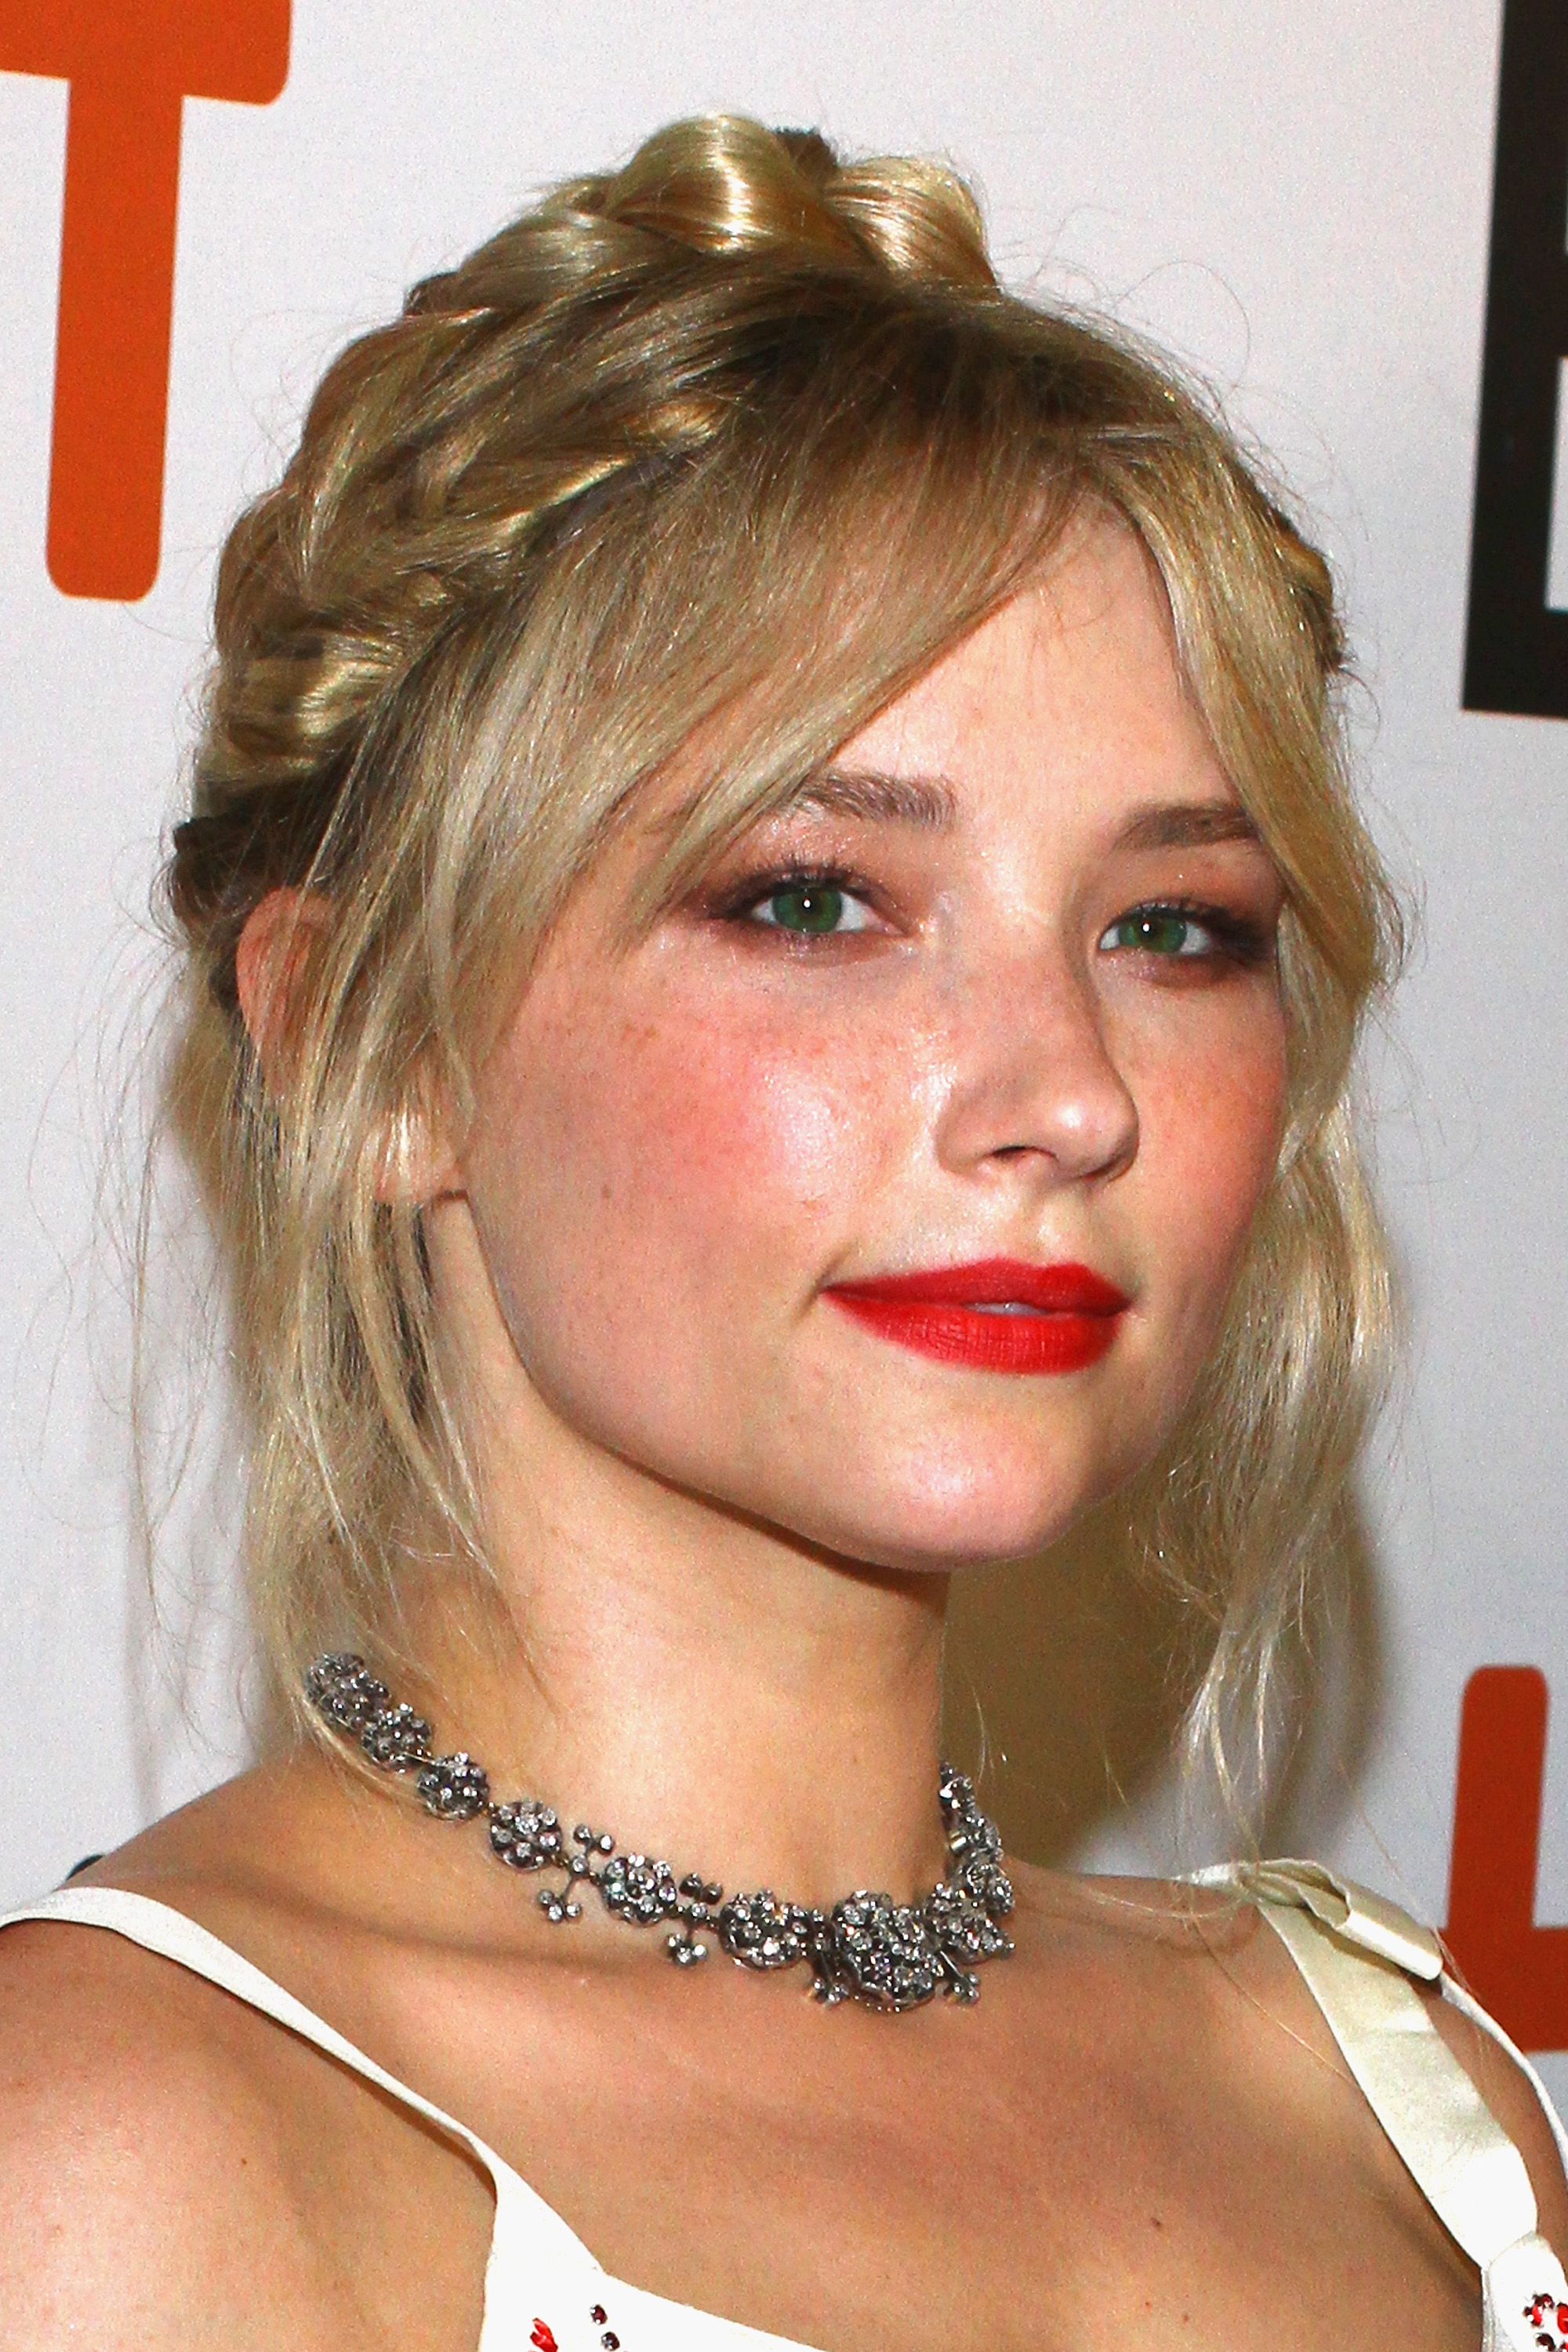 Haley Bennett - Biography & Pictures | ChordCAFE